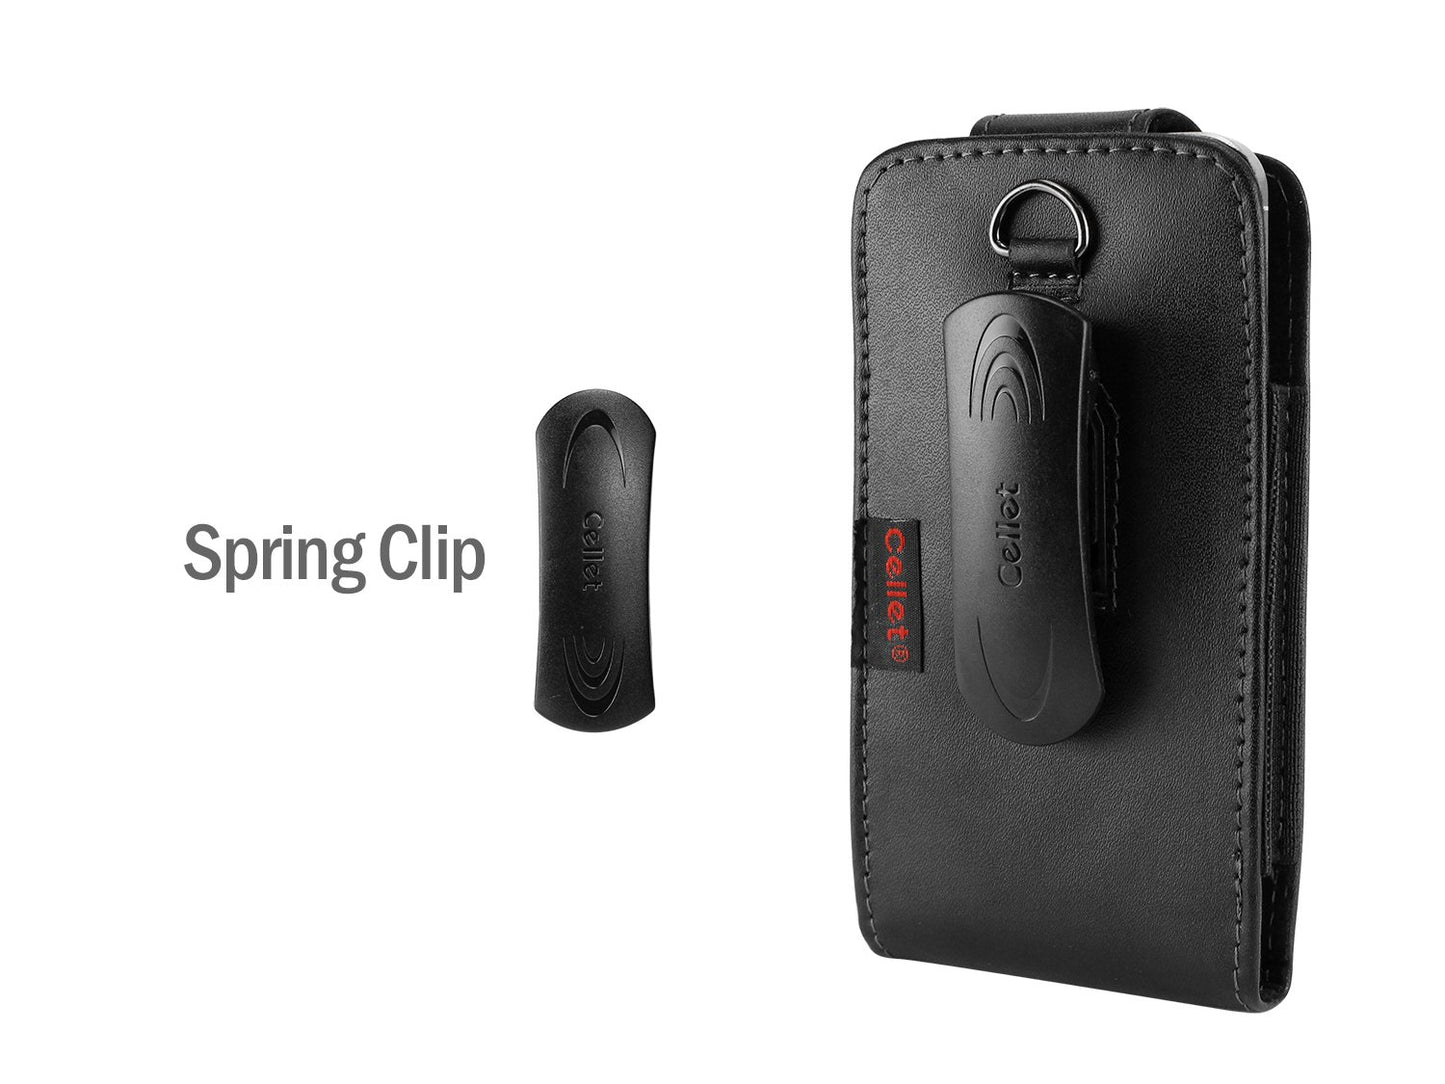 LTERP5 - Cellet Teramo Leather Case for Apple iPhone 5S, 5C, 5 with Spring and Swivel Clips